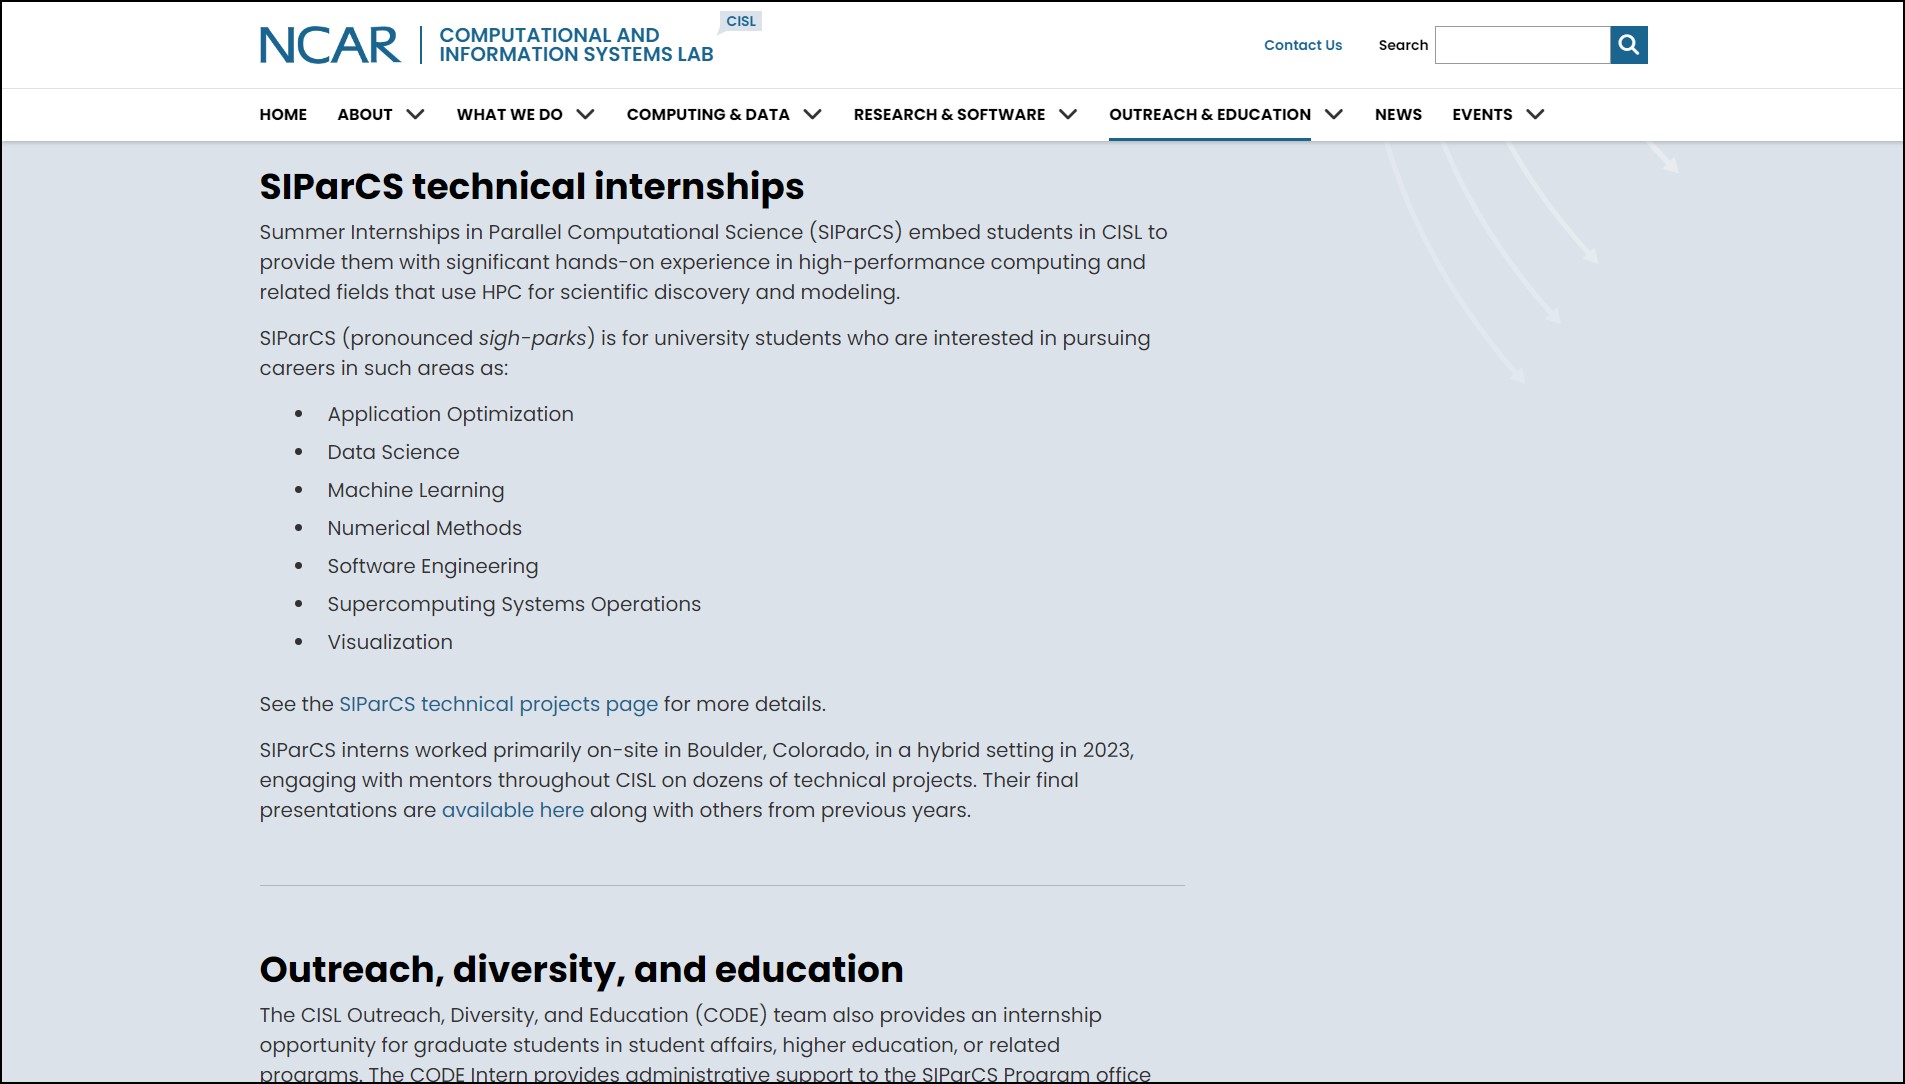 NCAR Computational and Information Systems Lab's SIParCS Technical Internships